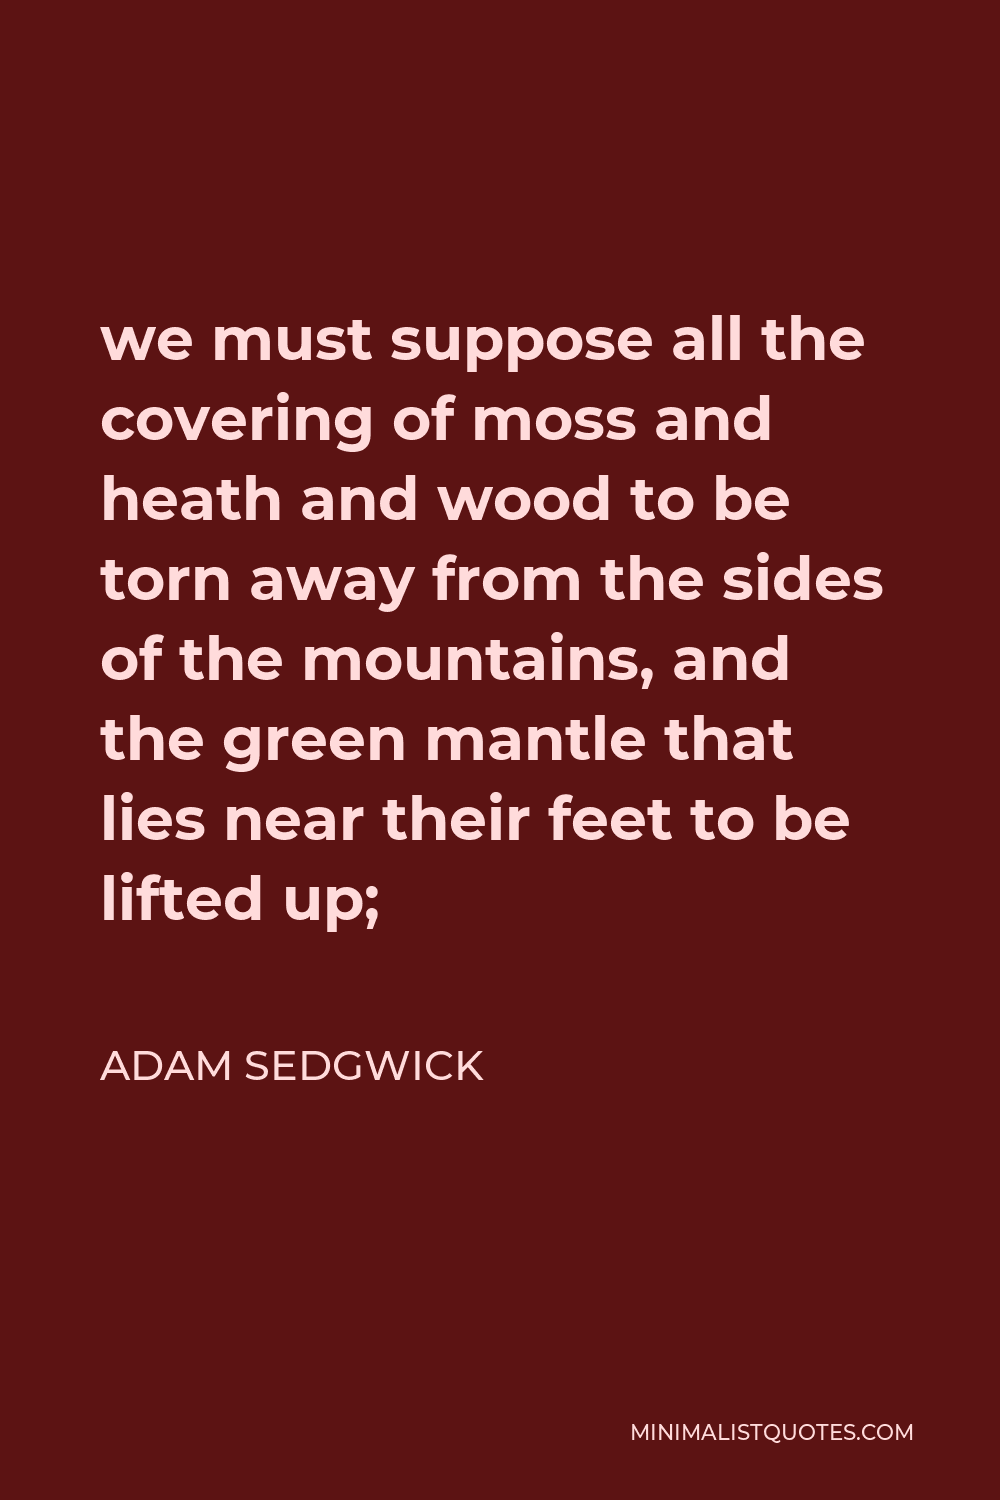 Adam Sedgwick Quote - we must suppose all the covering of moss and heath and wood to be torn away from the sides of the mountains, and the green mantle that lies near their feet to be lifted up;